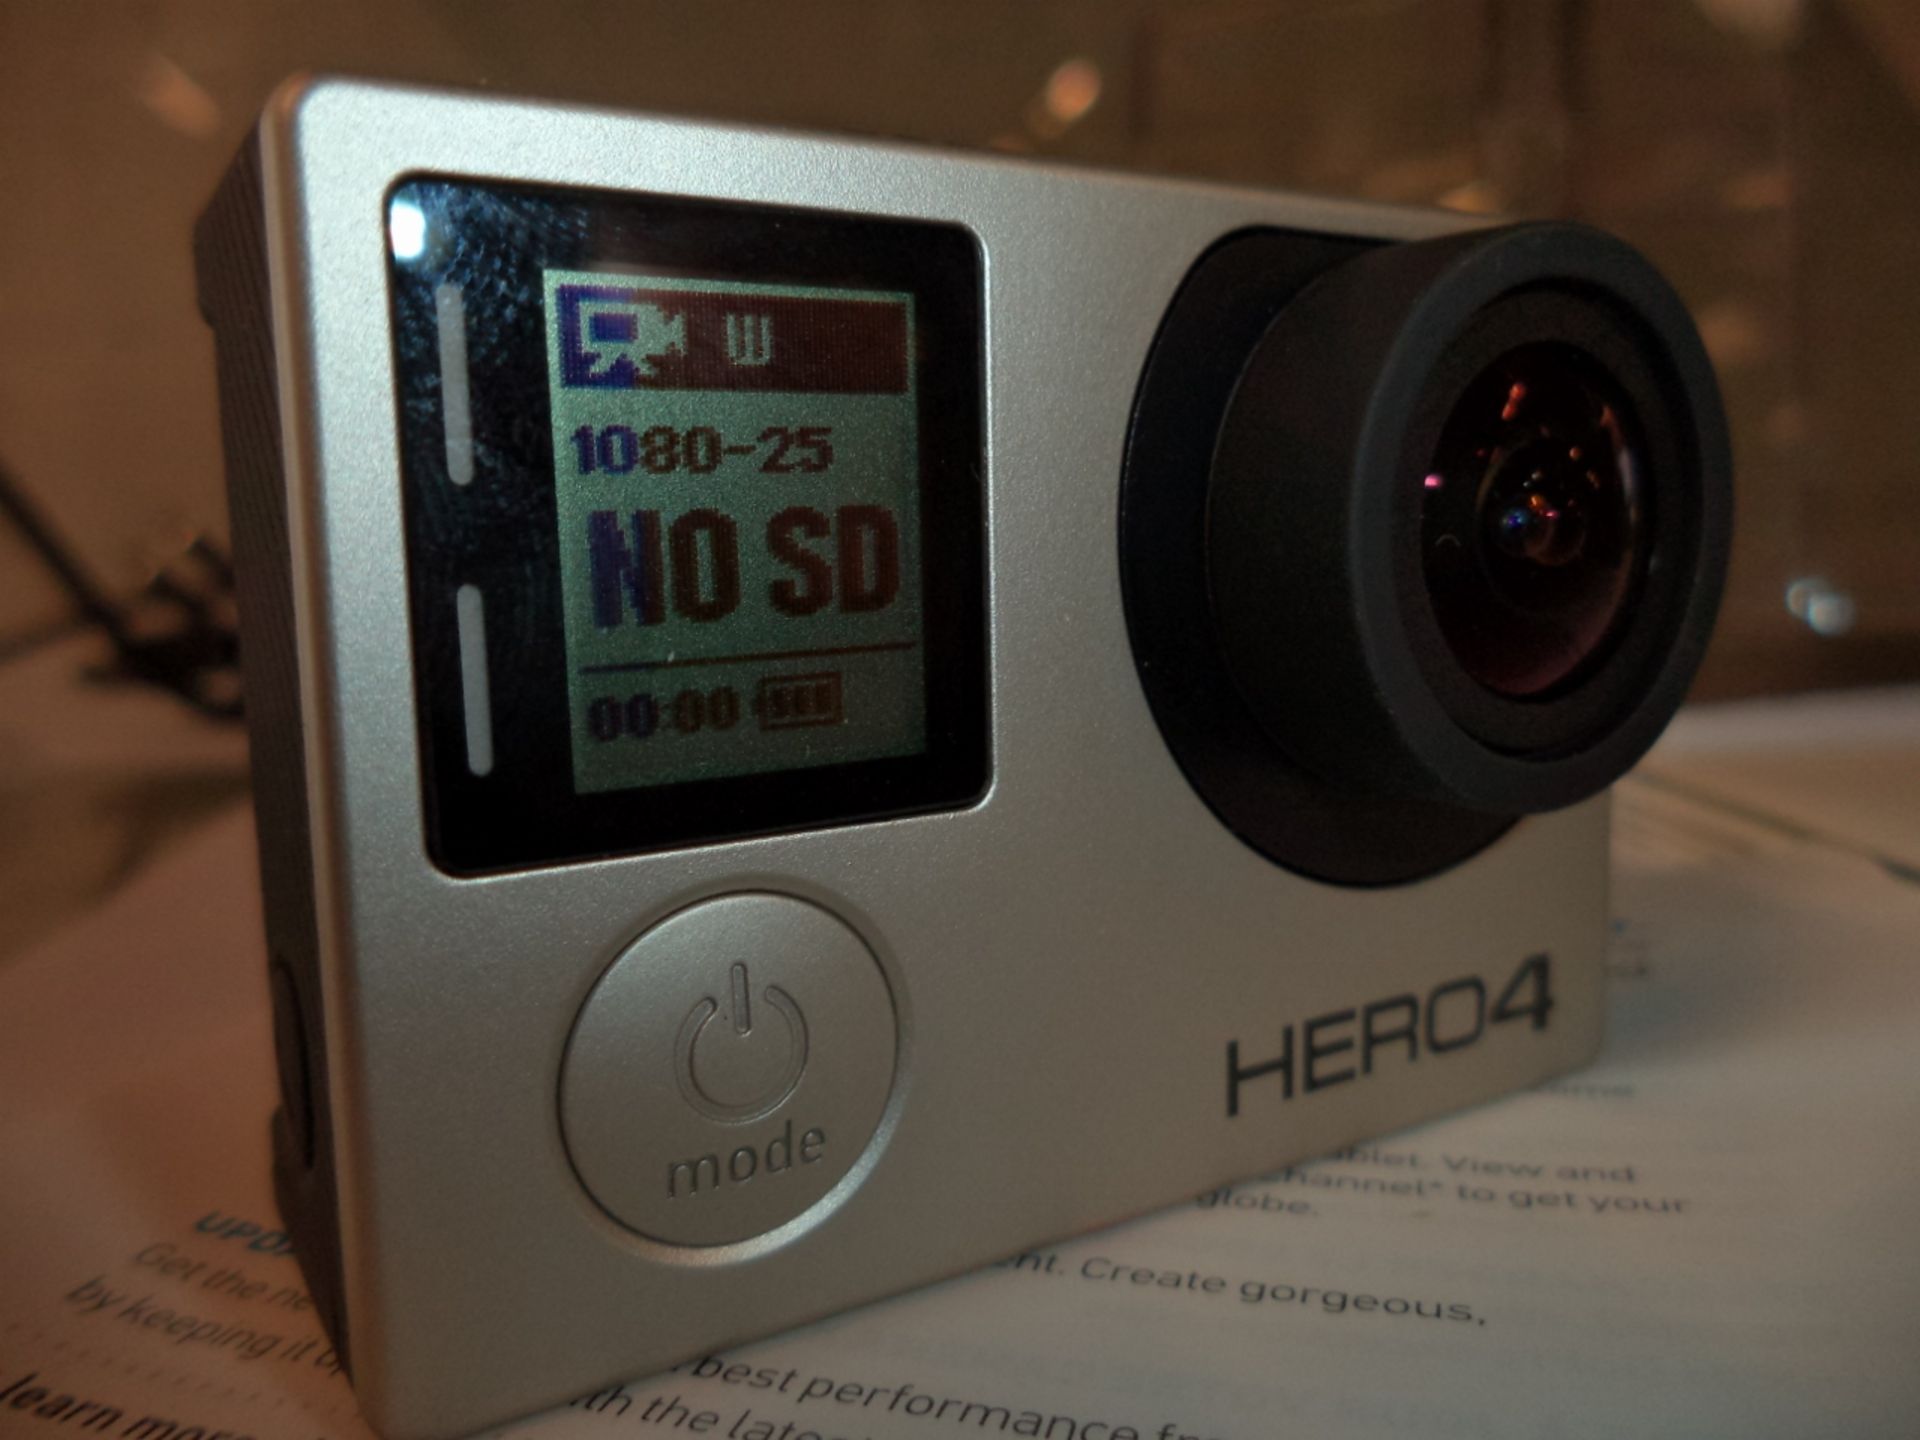 GoPro HERO4 Silver edition action video camera with built-in touchscreen display, box, manuals and - Image 6 of 11